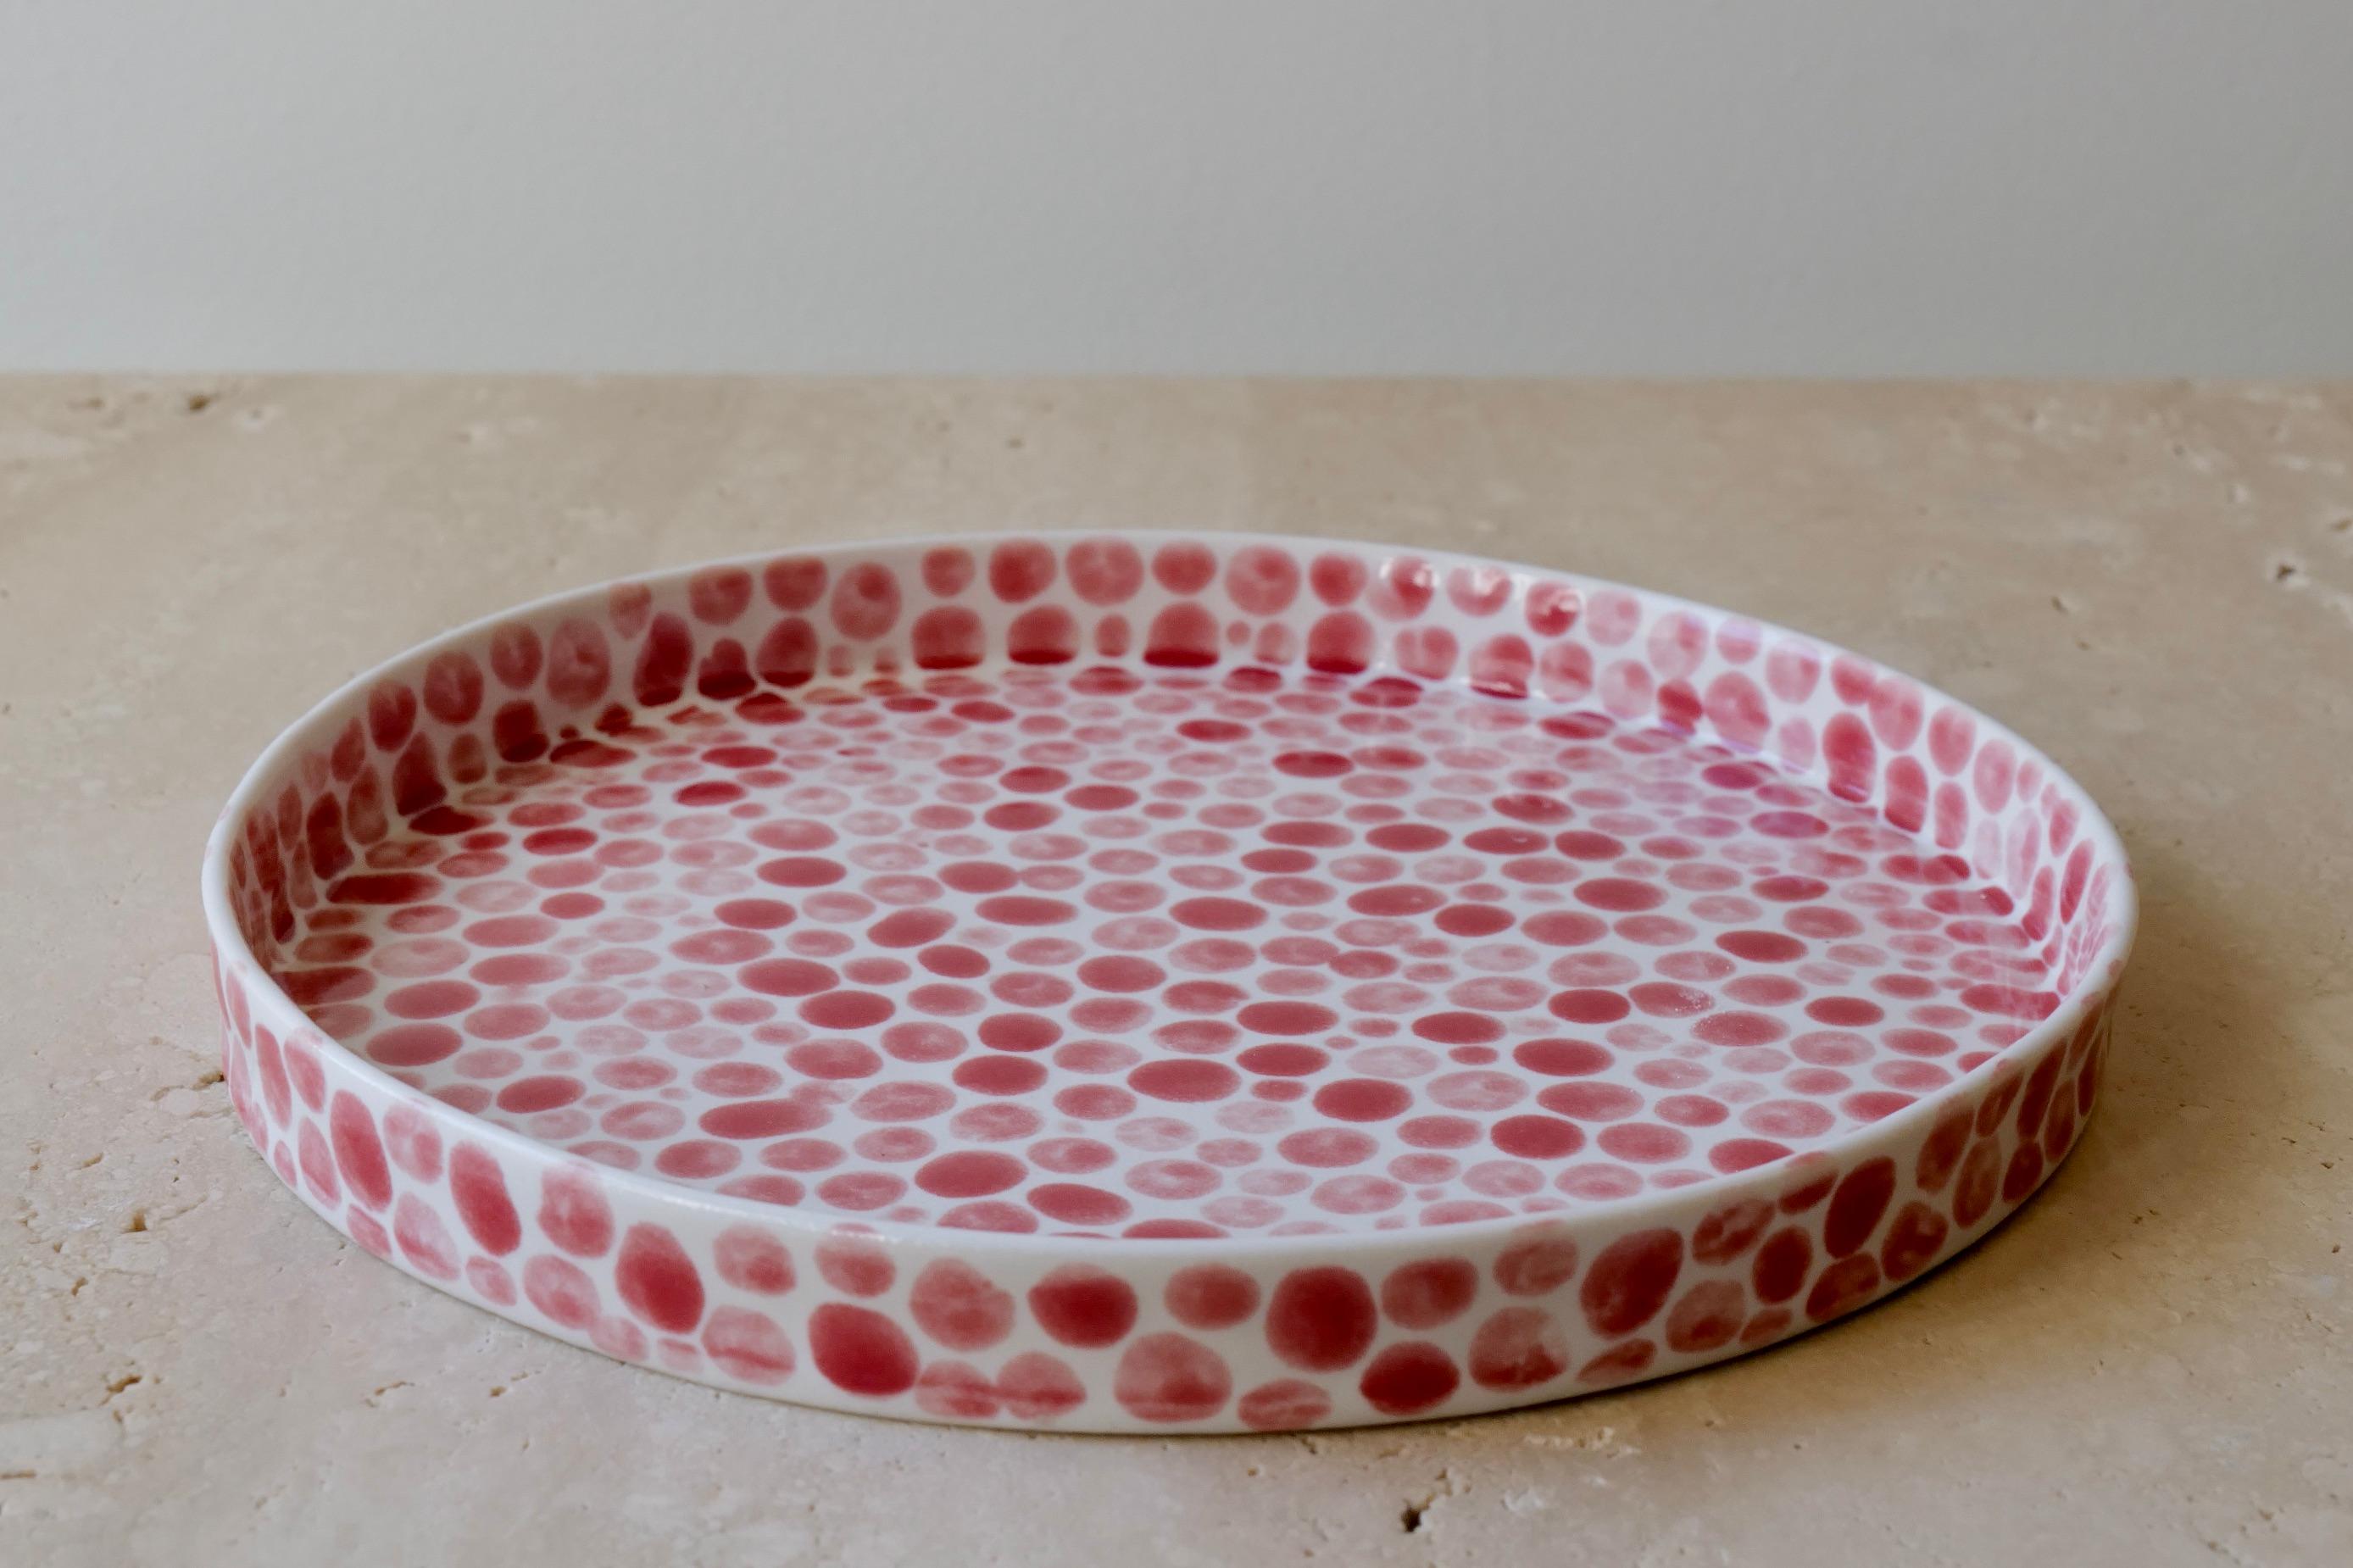 Ceramic plate perfect for serving or part of a set. Hand-cast in porcelain and once bisque fired, each dot is hand-painted with a red glaze. An unconventional layered glazing technique, developed by the artist, is used in these cast porcelain